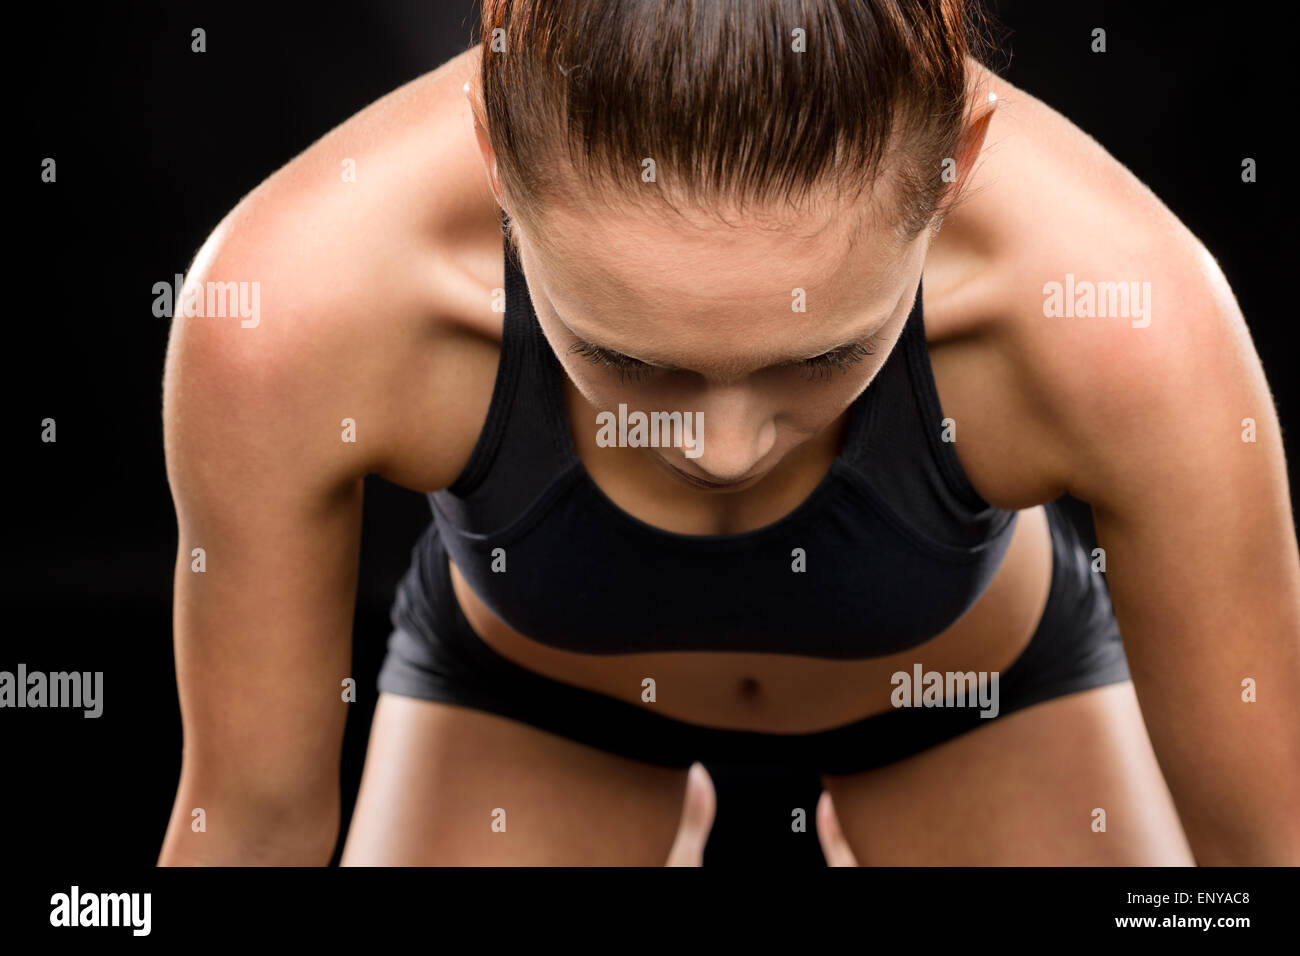 Pretty young woman doing stretching exercise pose Stock Photo